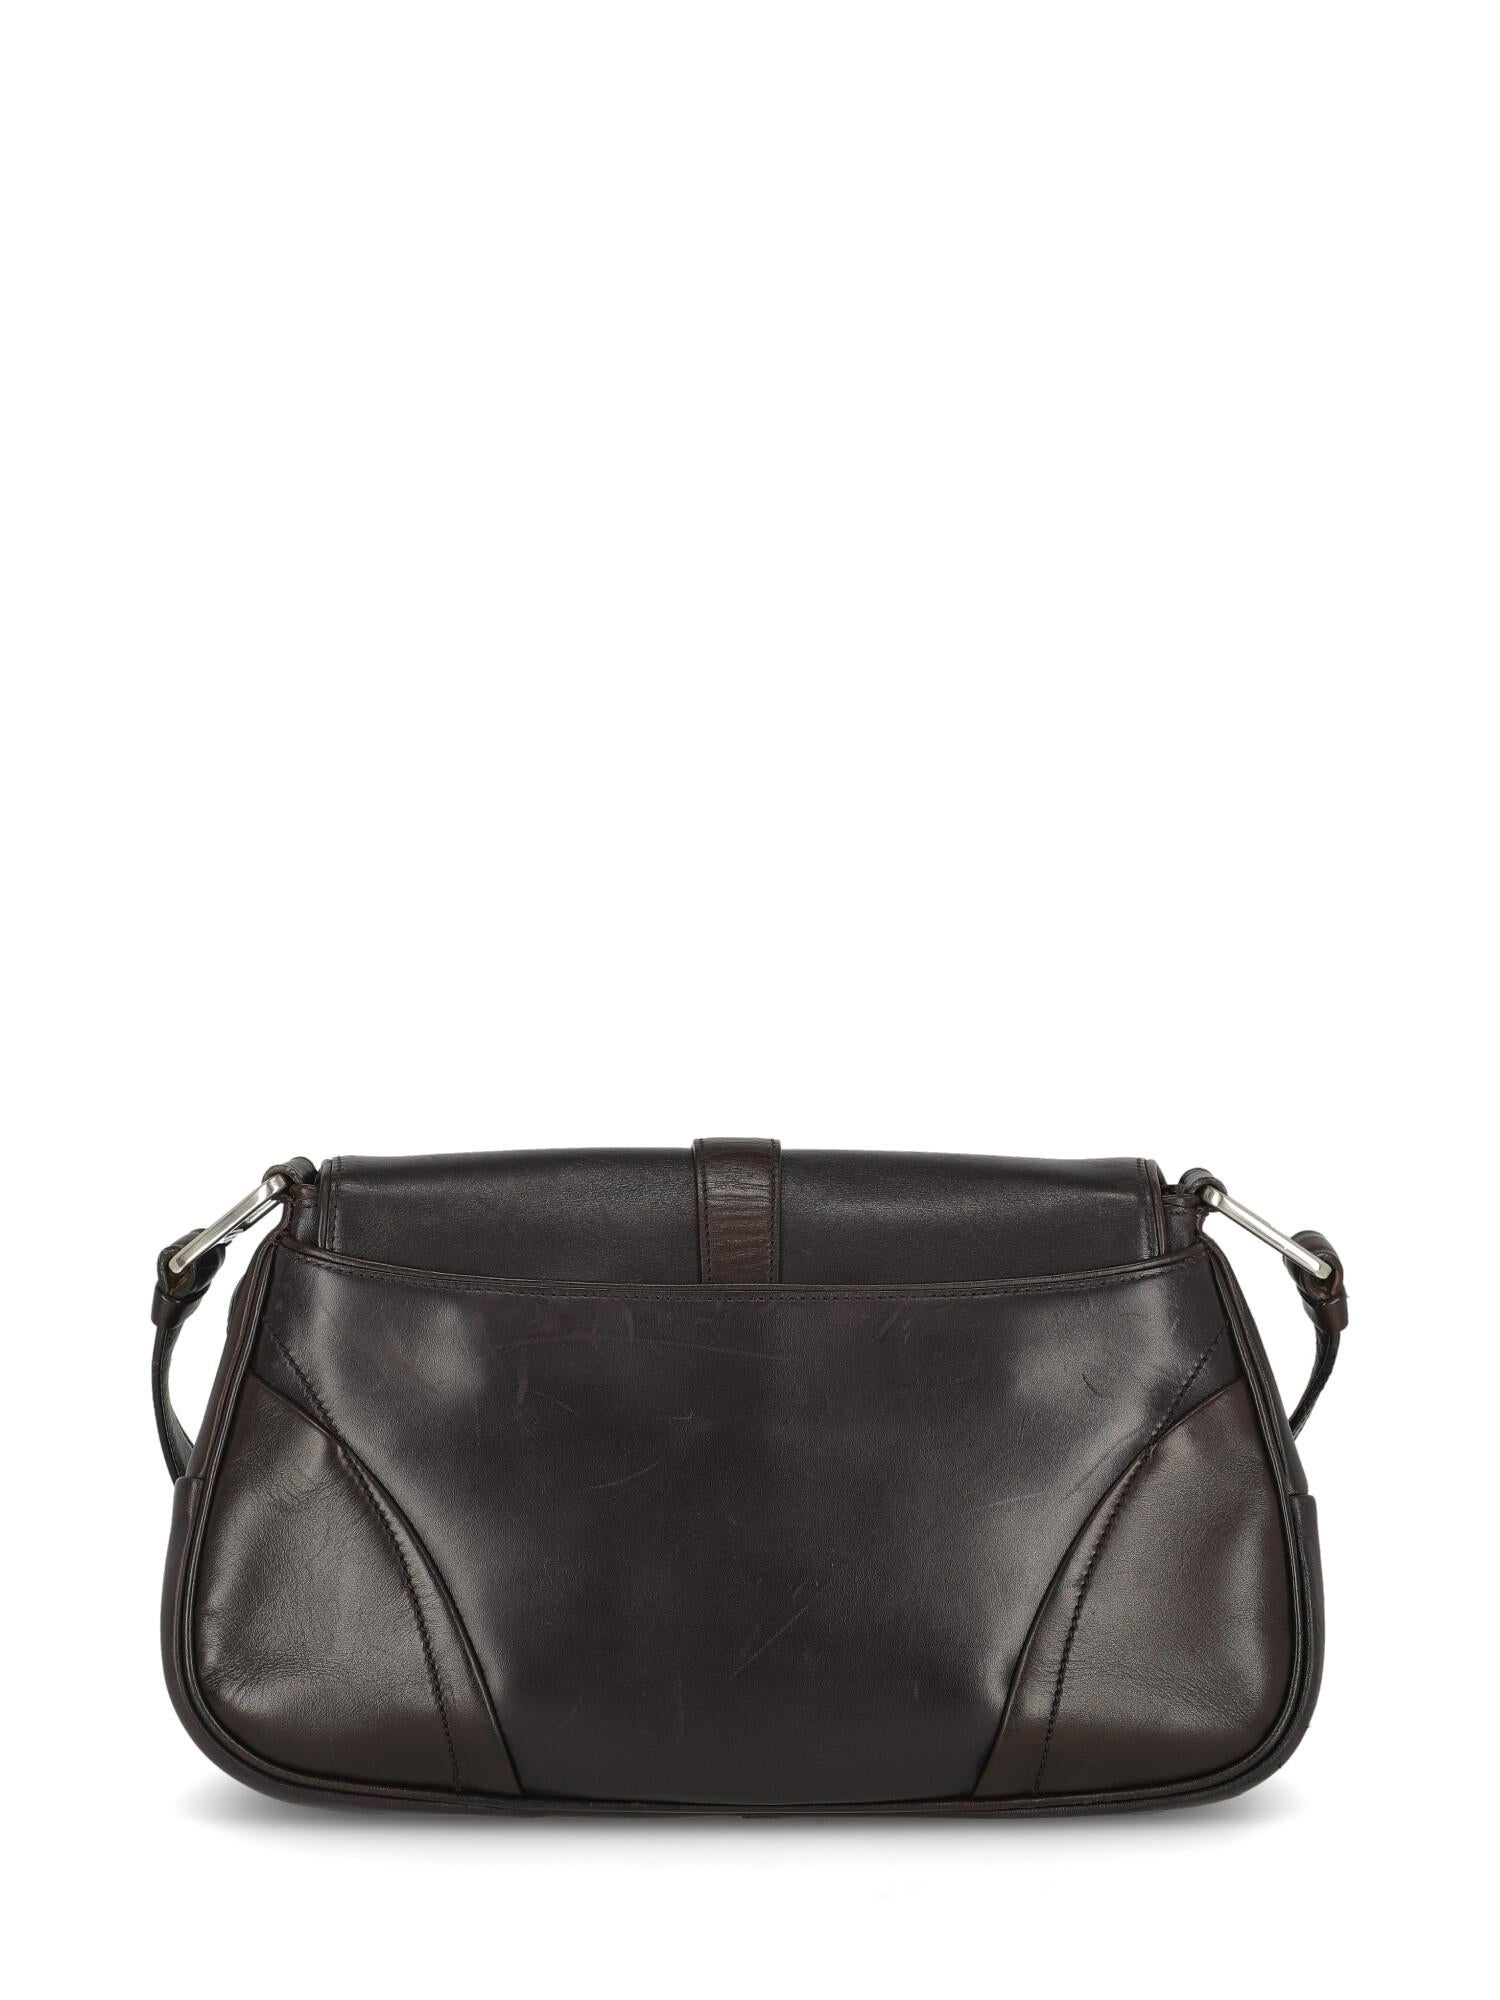 Prada Woman Shoulder bag Brown Leather In Fair Condition For Sale In Milan, IT